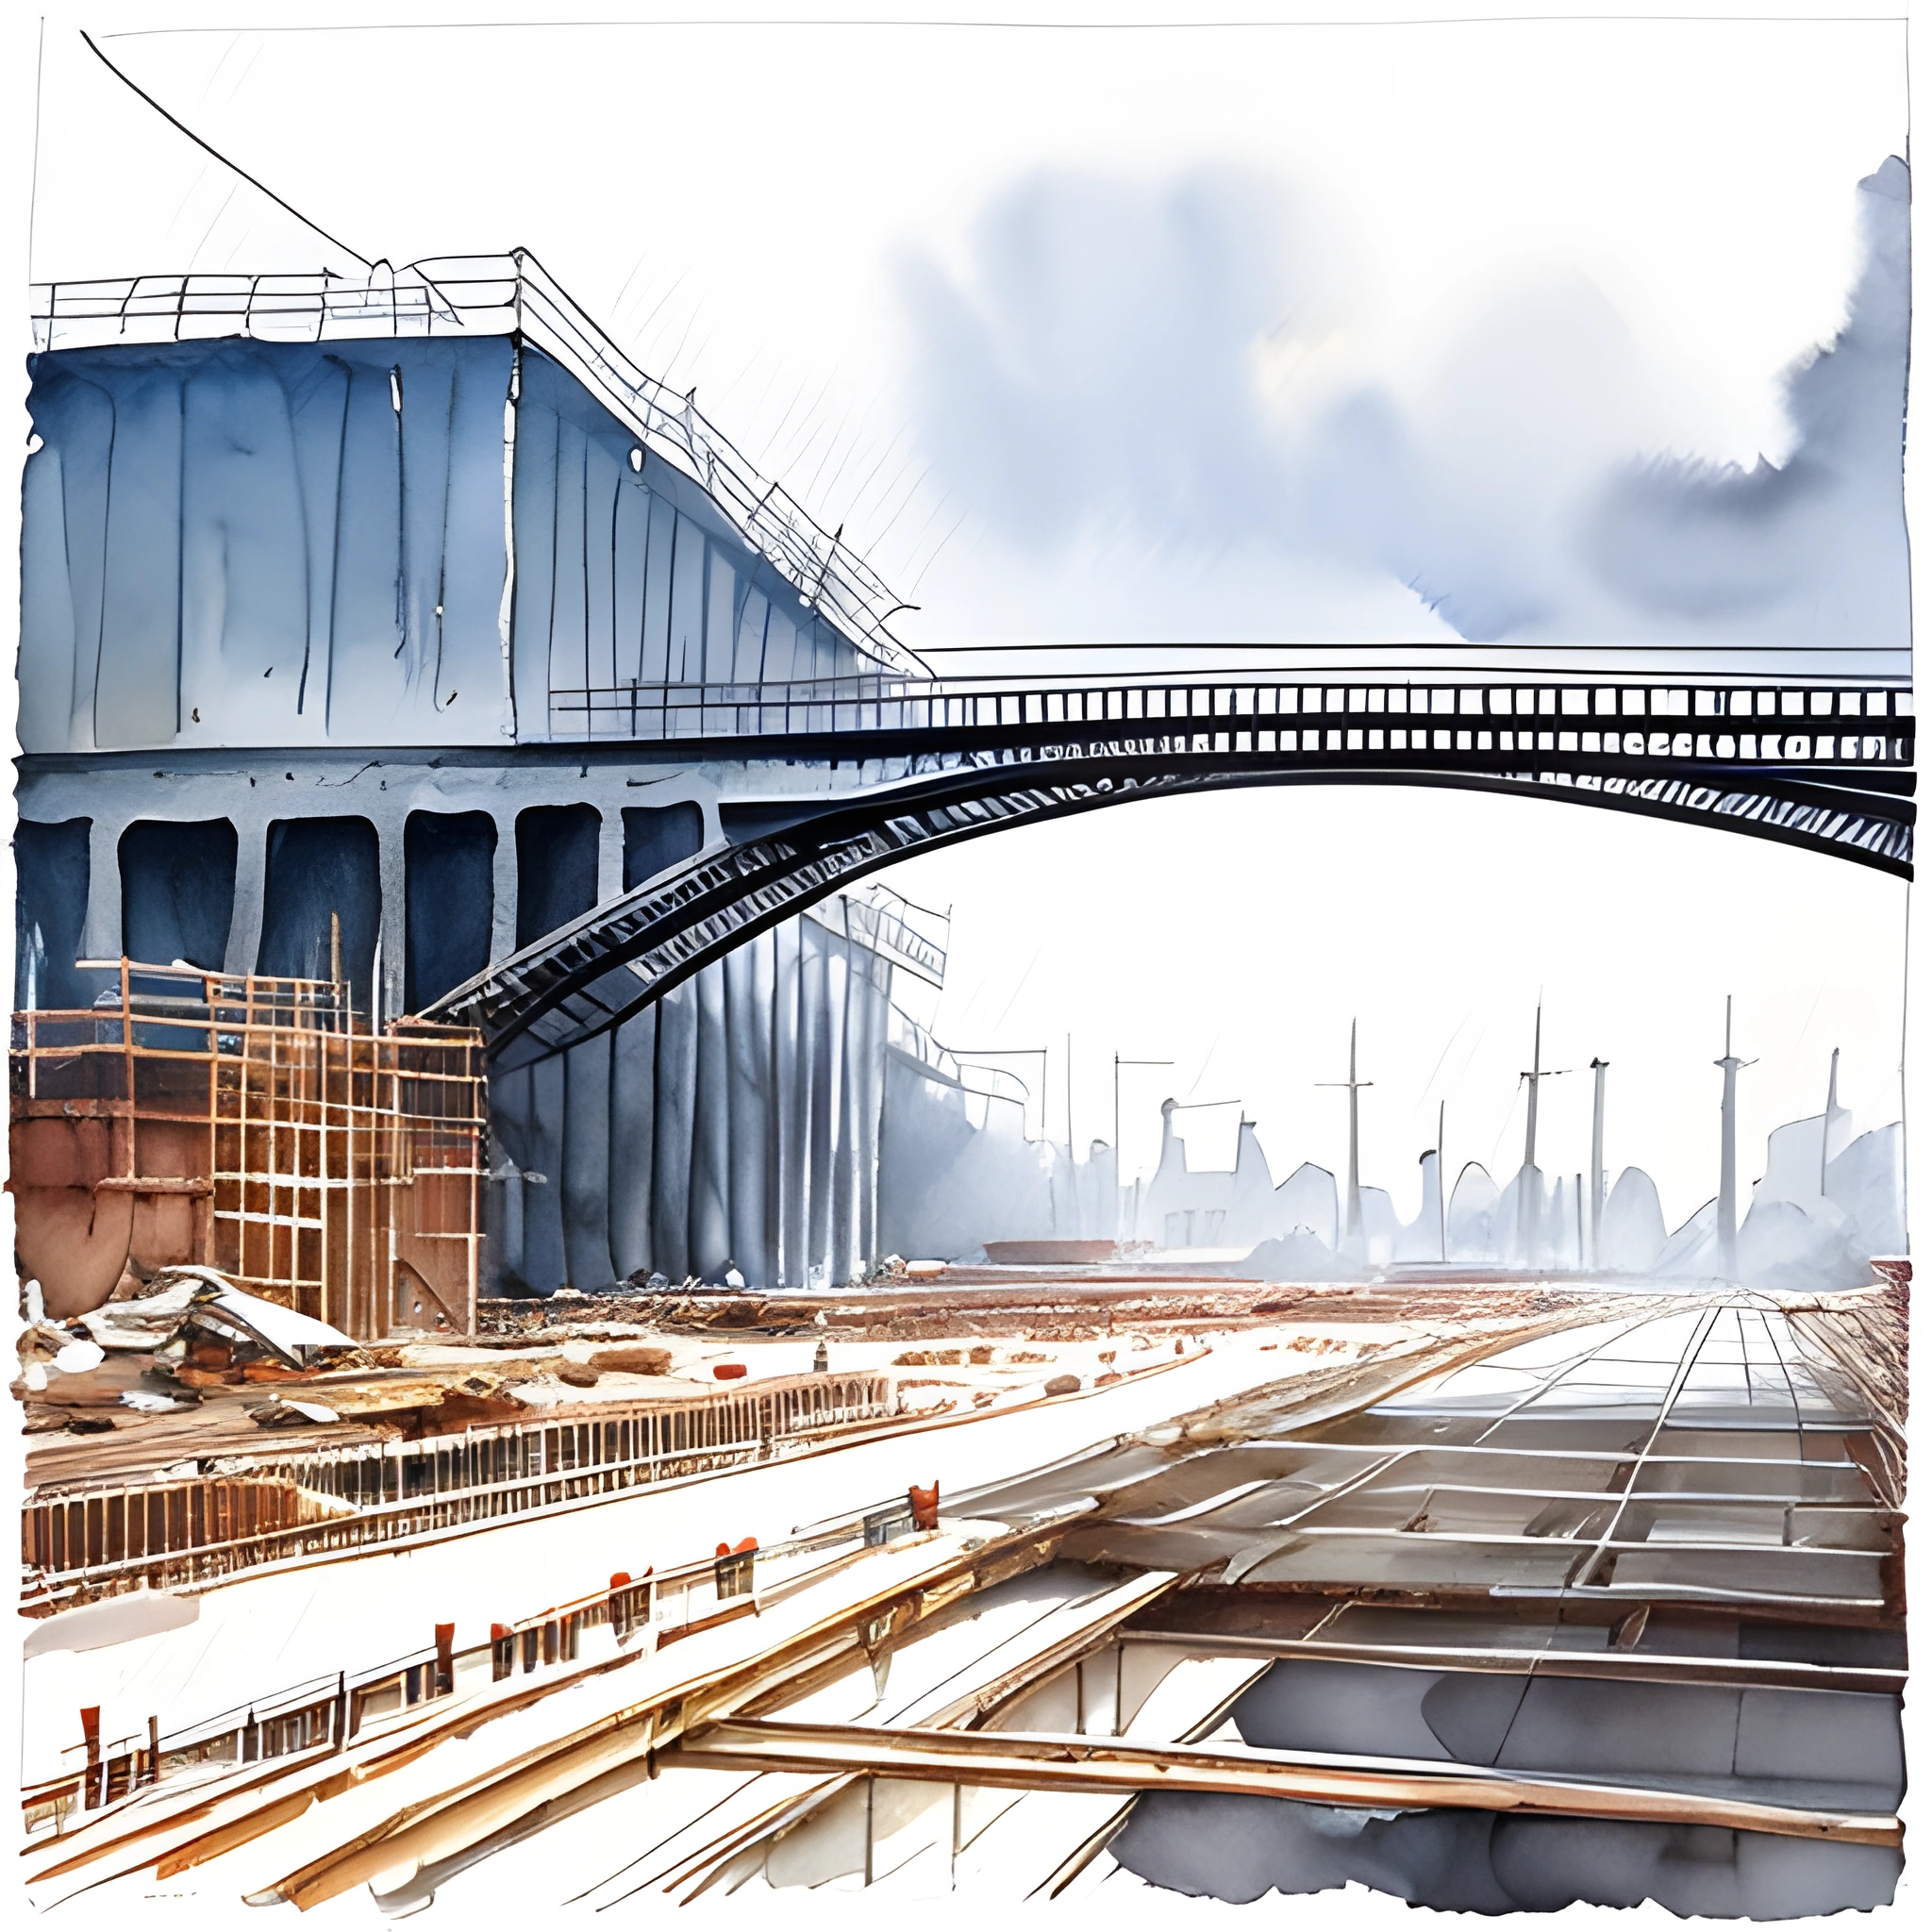 painting of a train track with a bridge over it